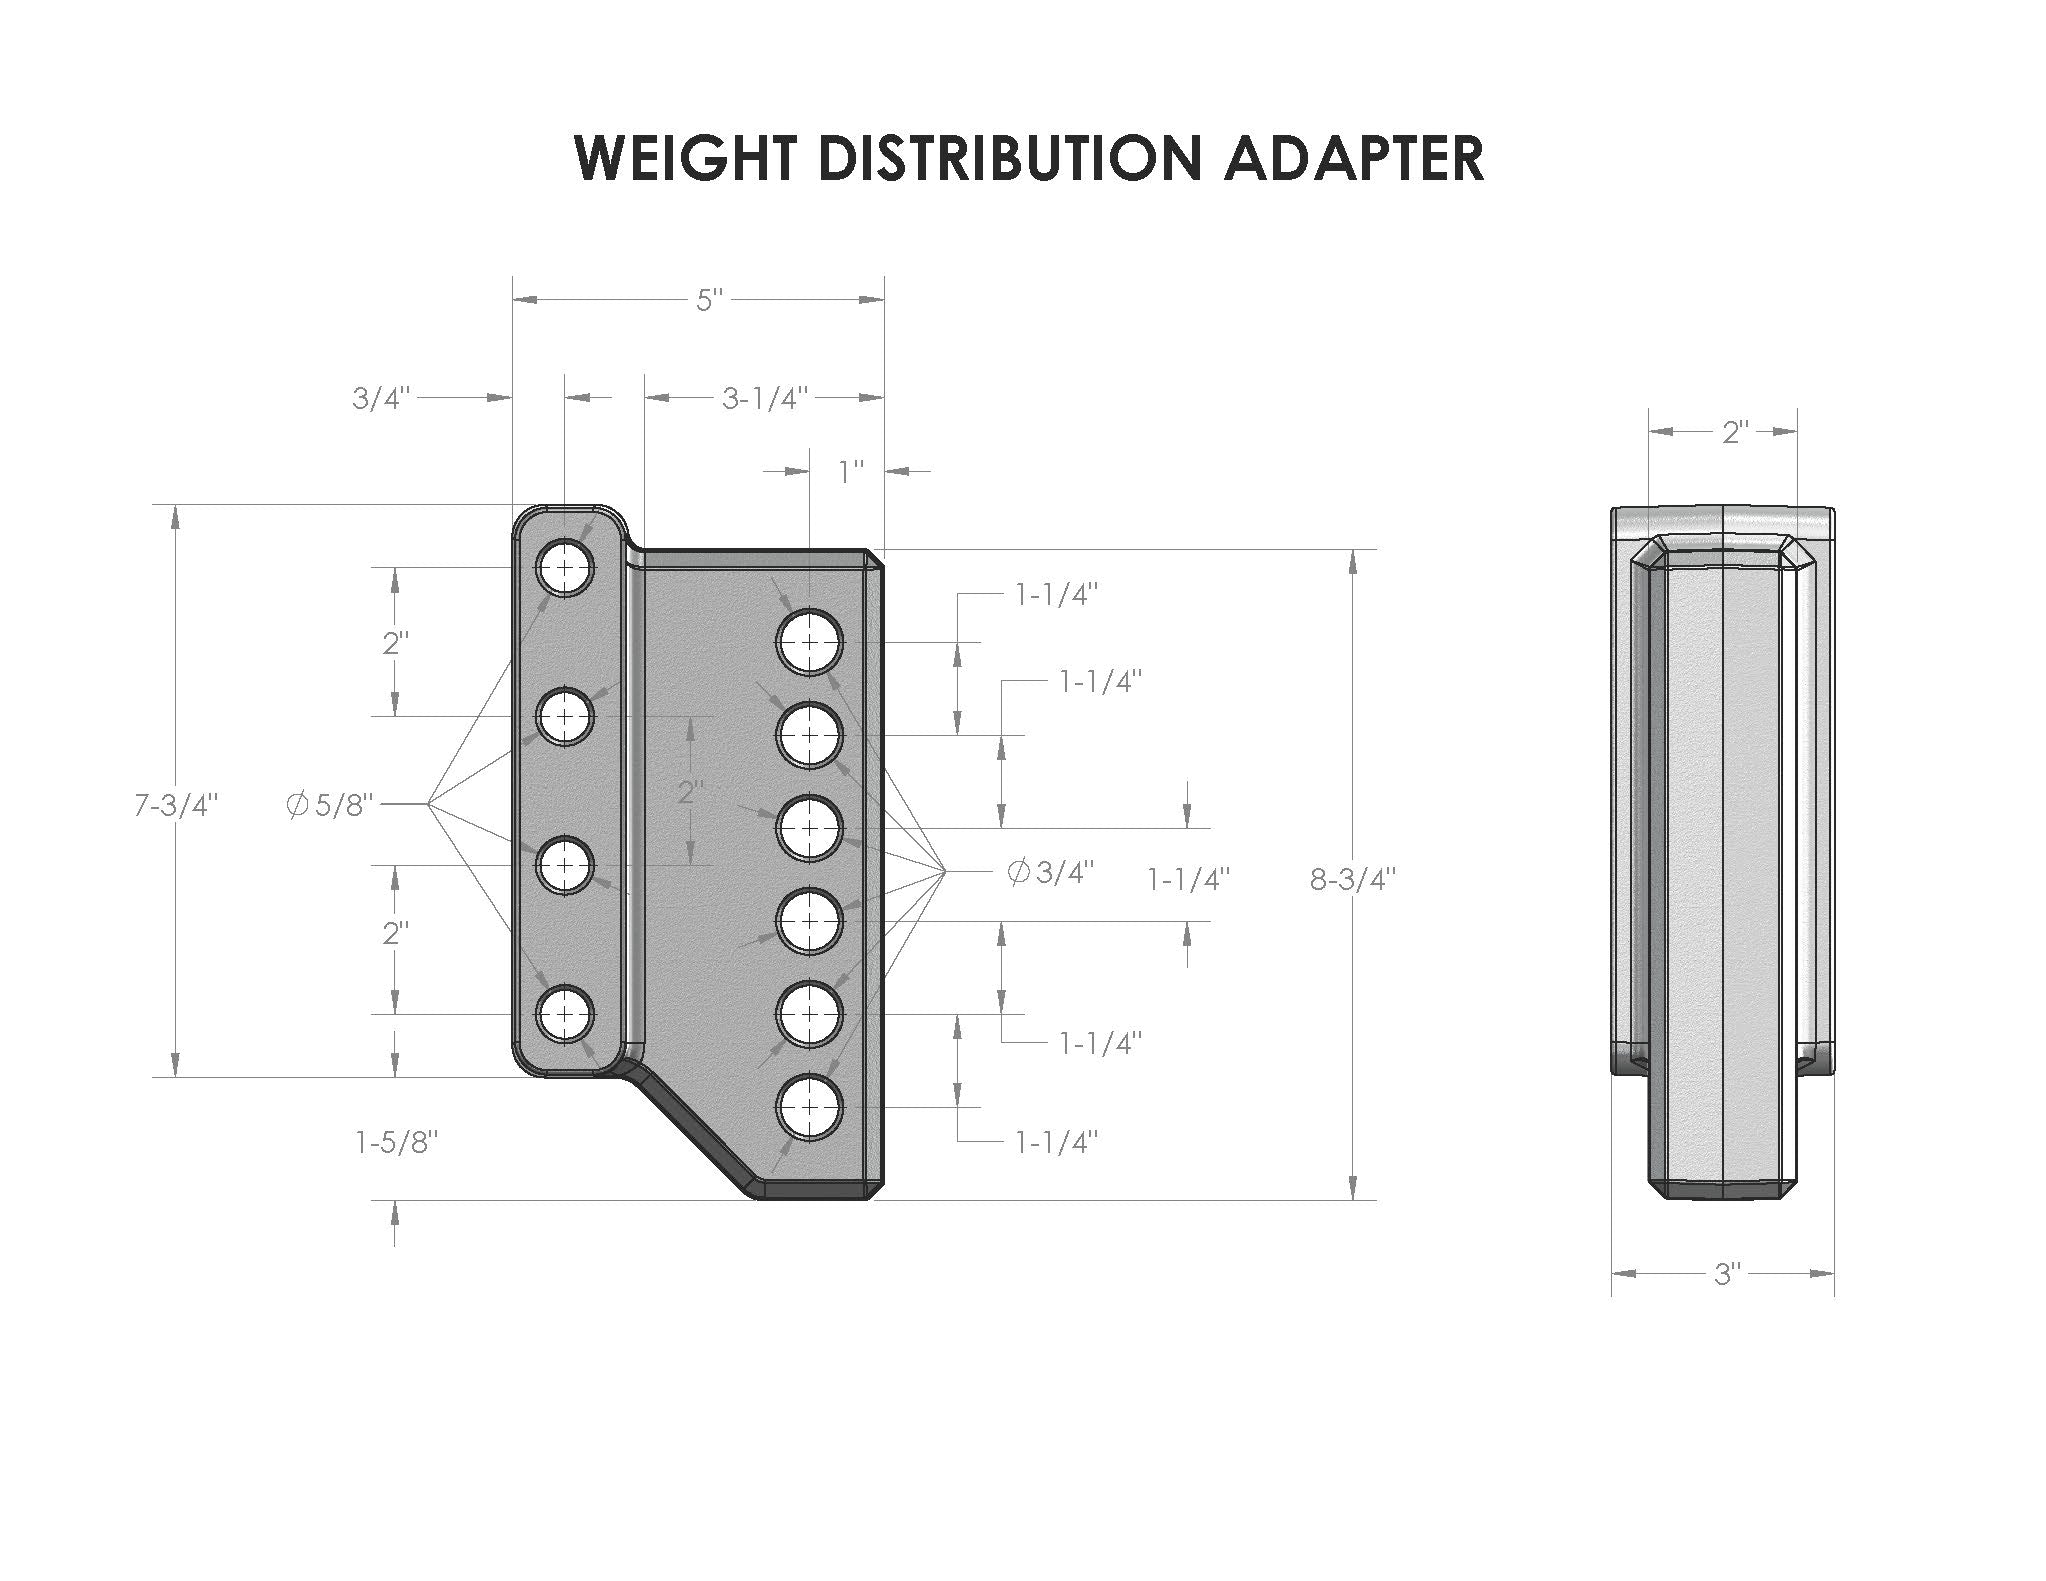 Heavy Duty Weight Distribution Adapter Design Specification